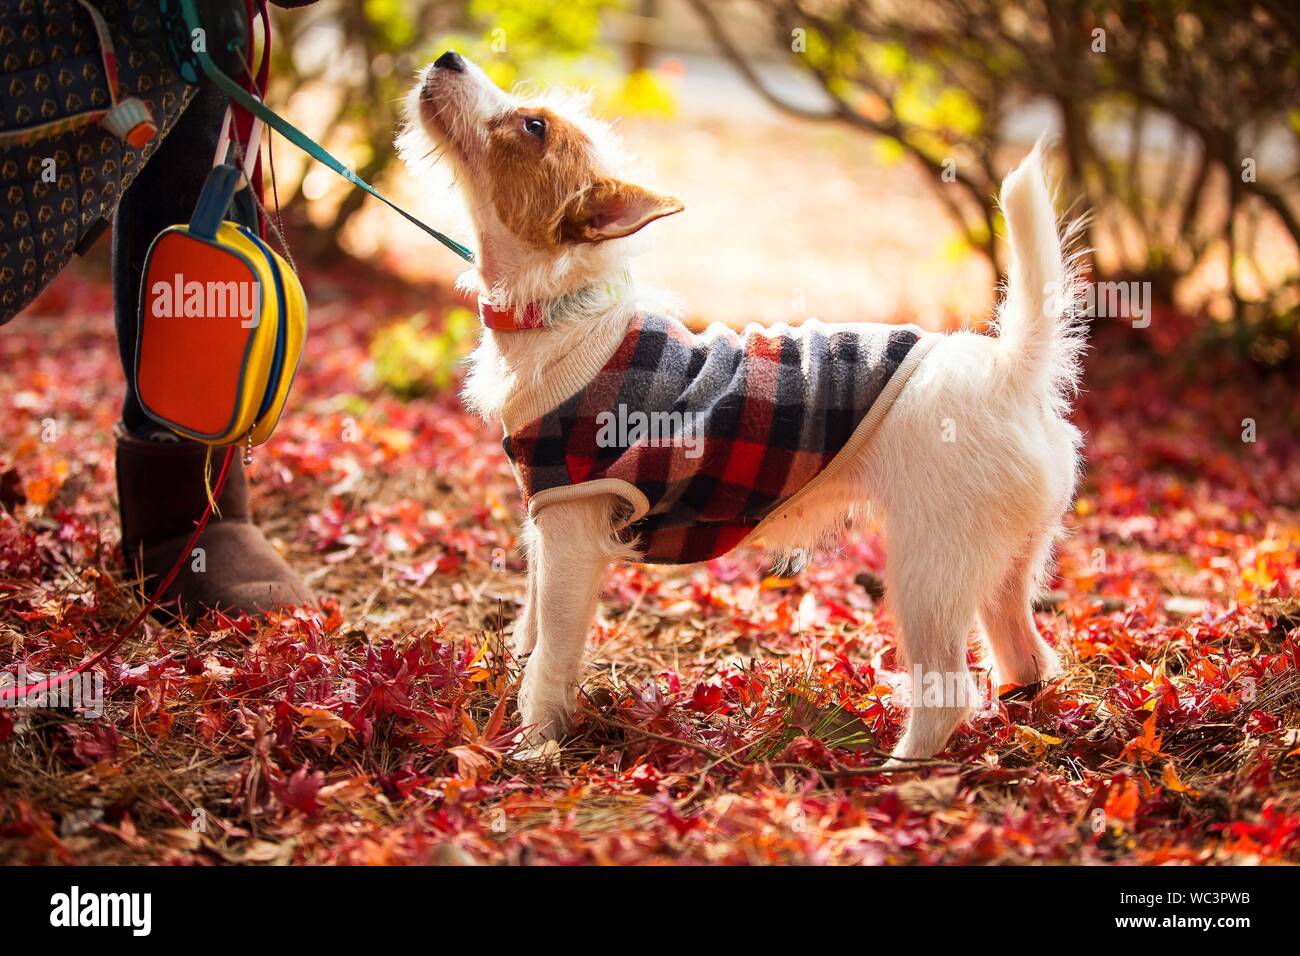 Full Length View Of Dog During Autumn Stock Photo